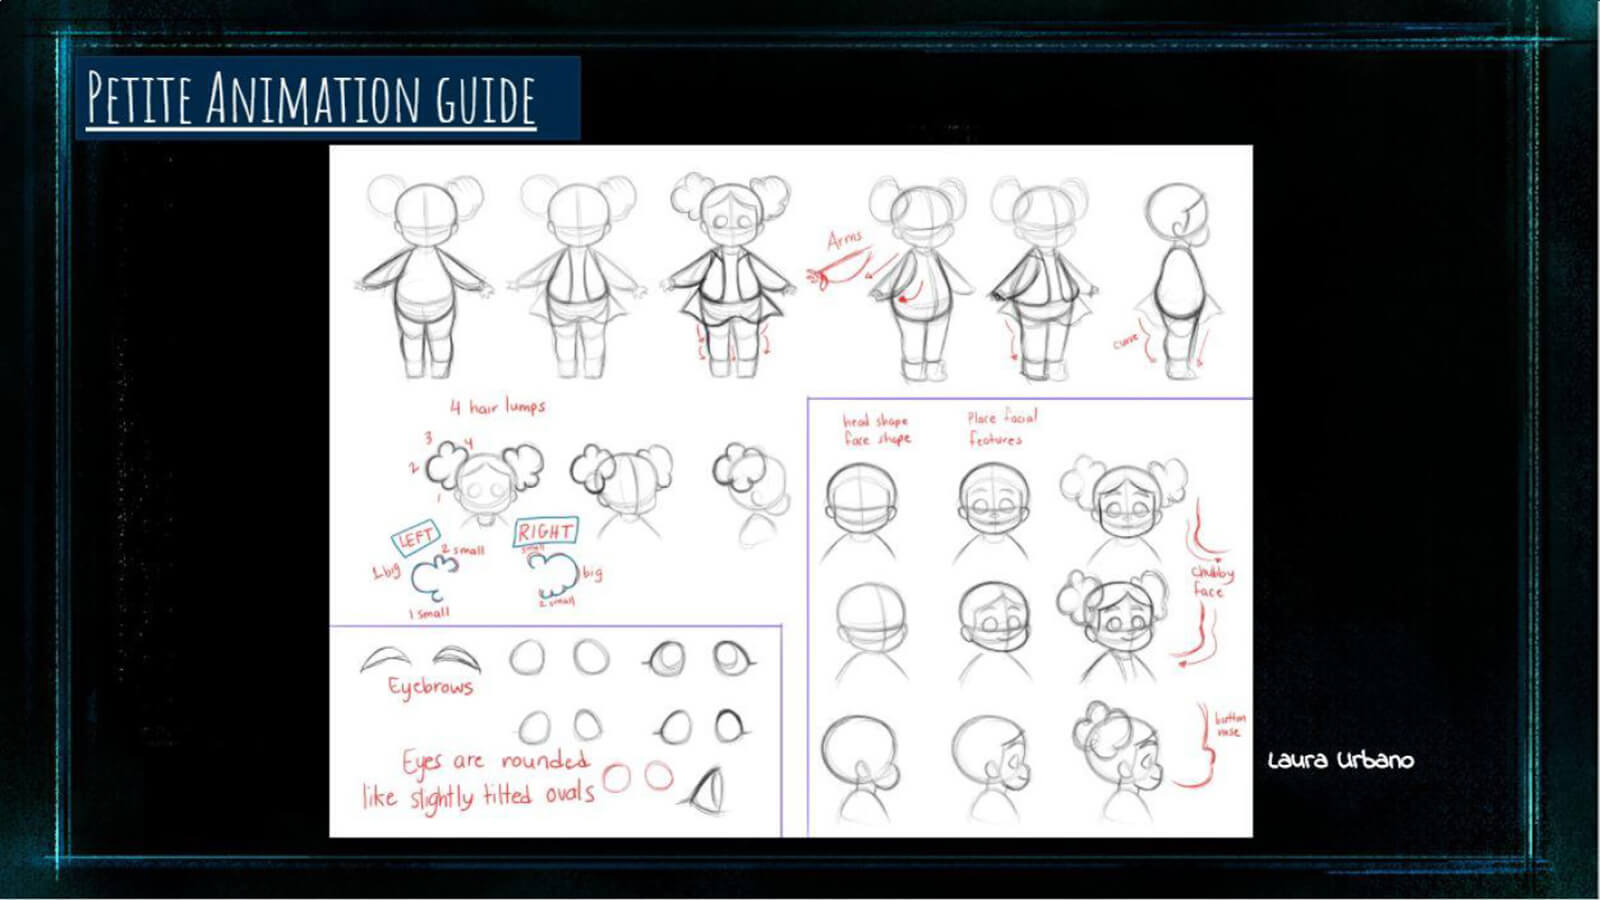 An animation guide for the film's character Petite, showing proper proportions, as well as hair, face, and eye shapes.